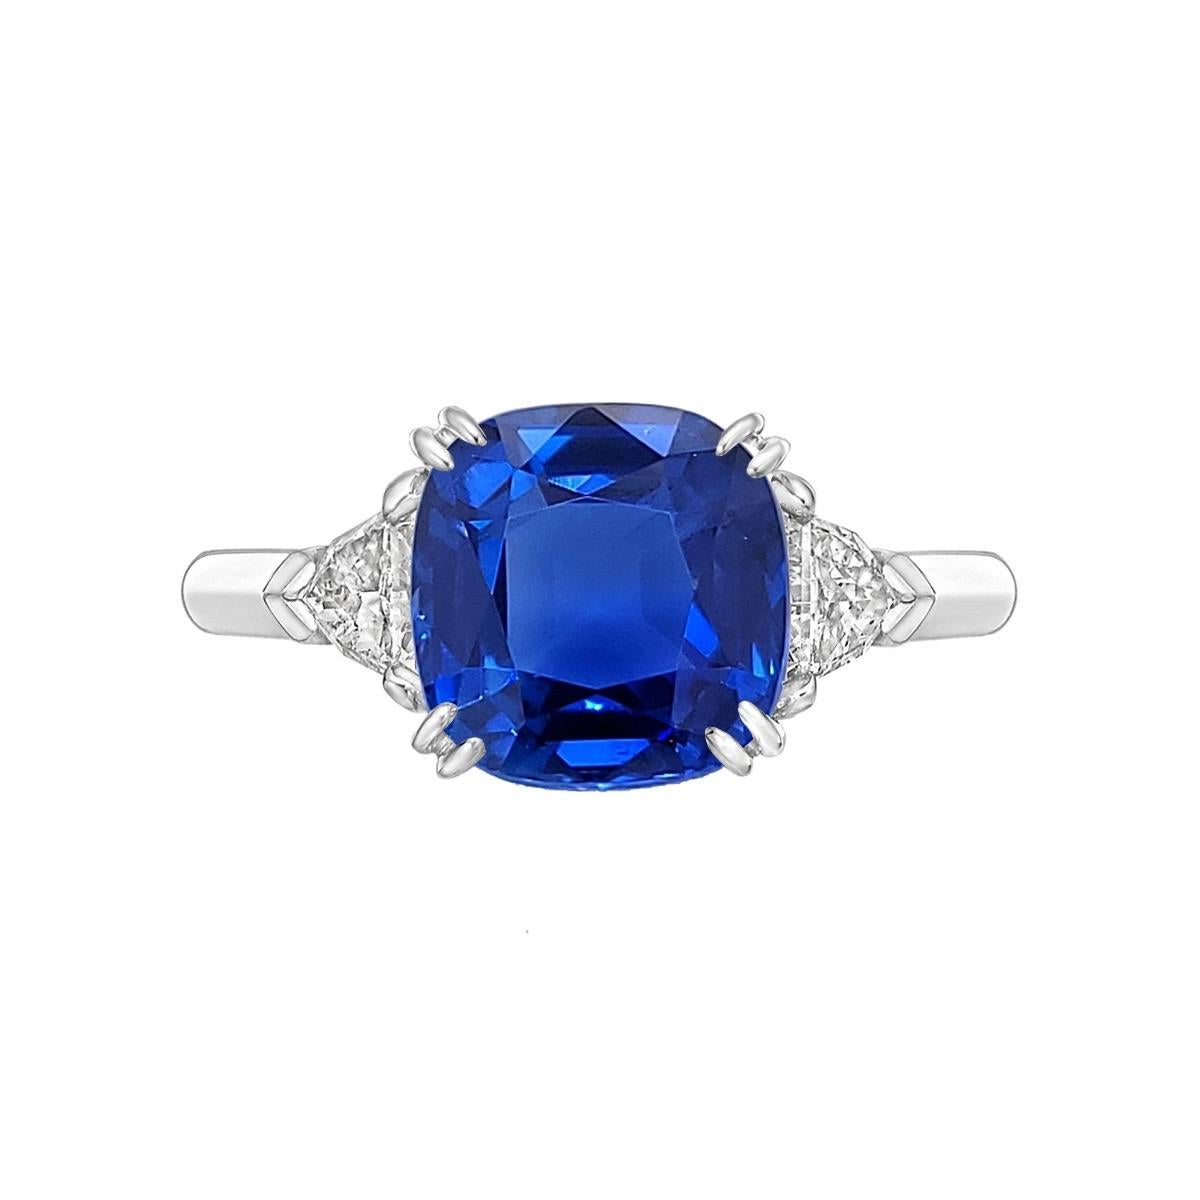 From the vault at Emilio Jewelry New York,

A truly special no heat ceylon sapphire, a super gem quality stone with excellent clarity, cut, and brilliance. The color has been officially classified on the certificate as cornflower blue, one of the